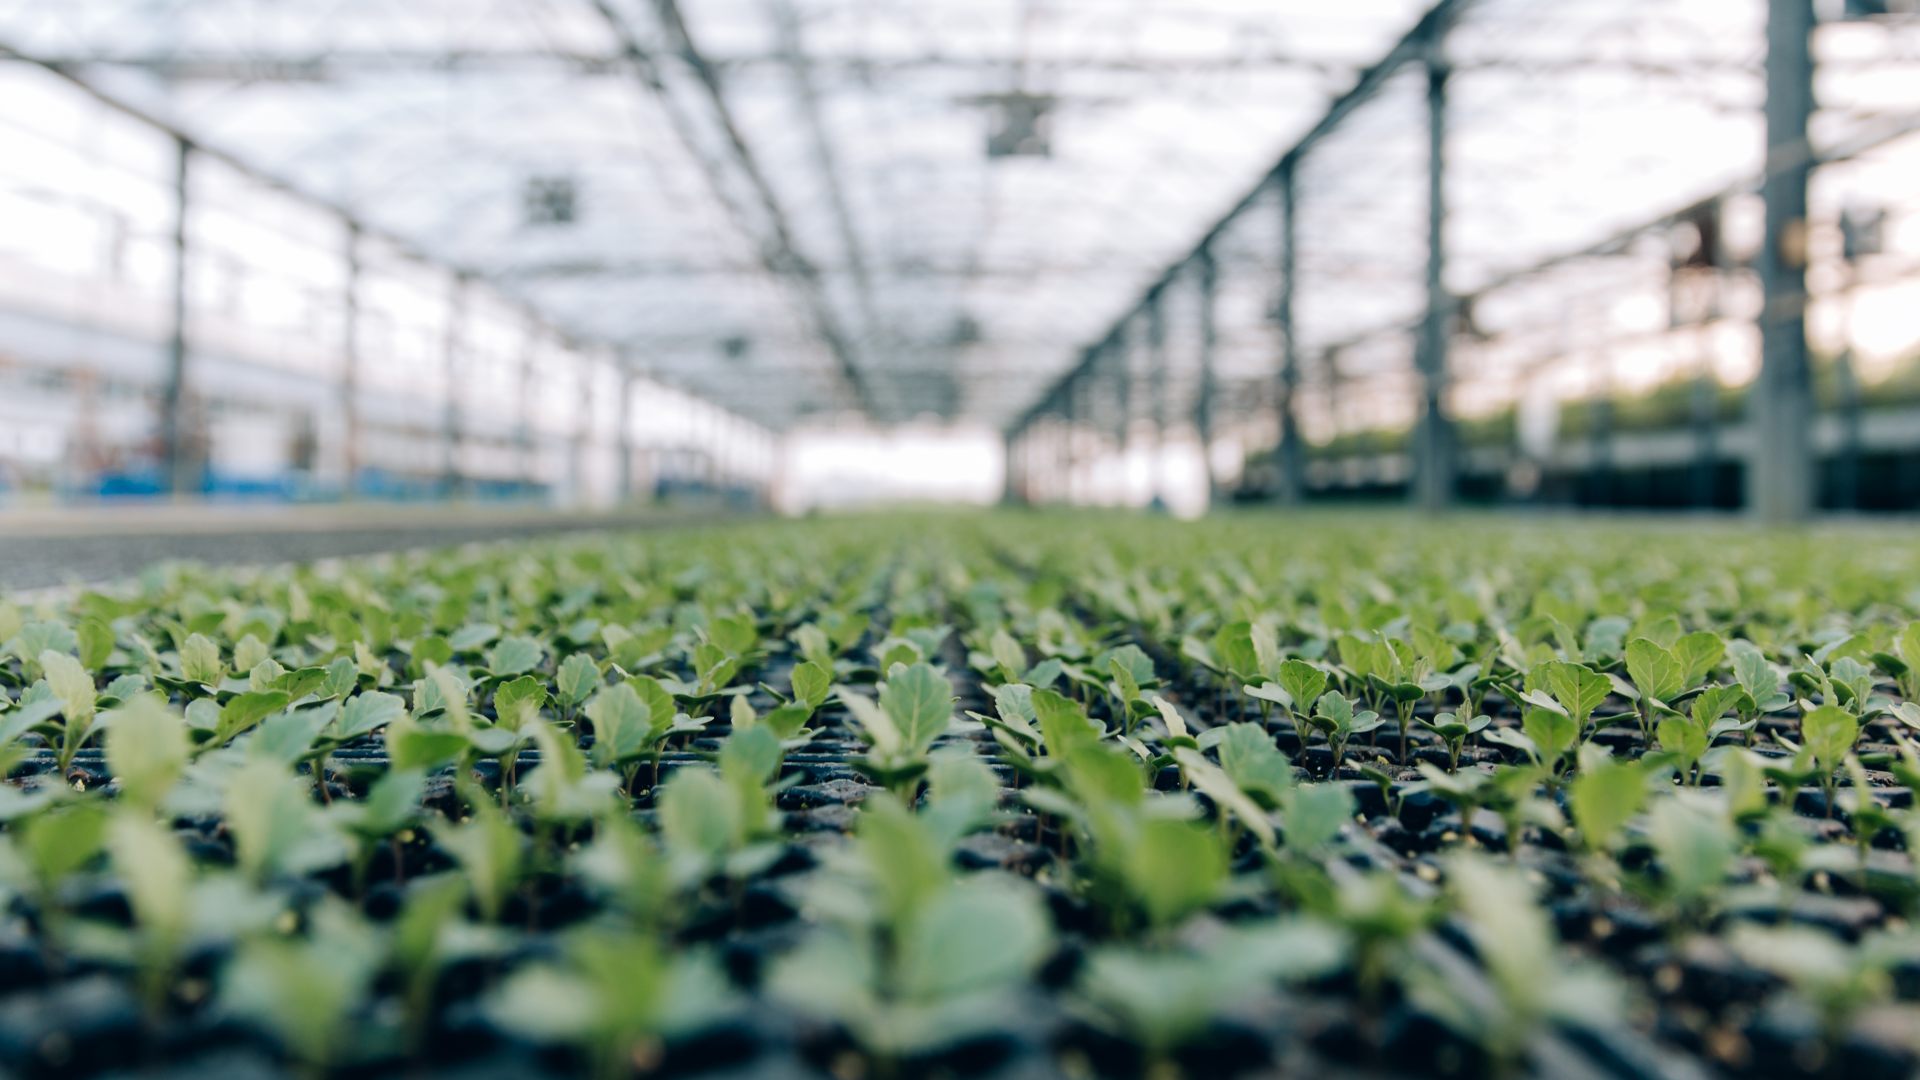 Atlas Greenhouse has been acquired by Mangrove Equity Partners